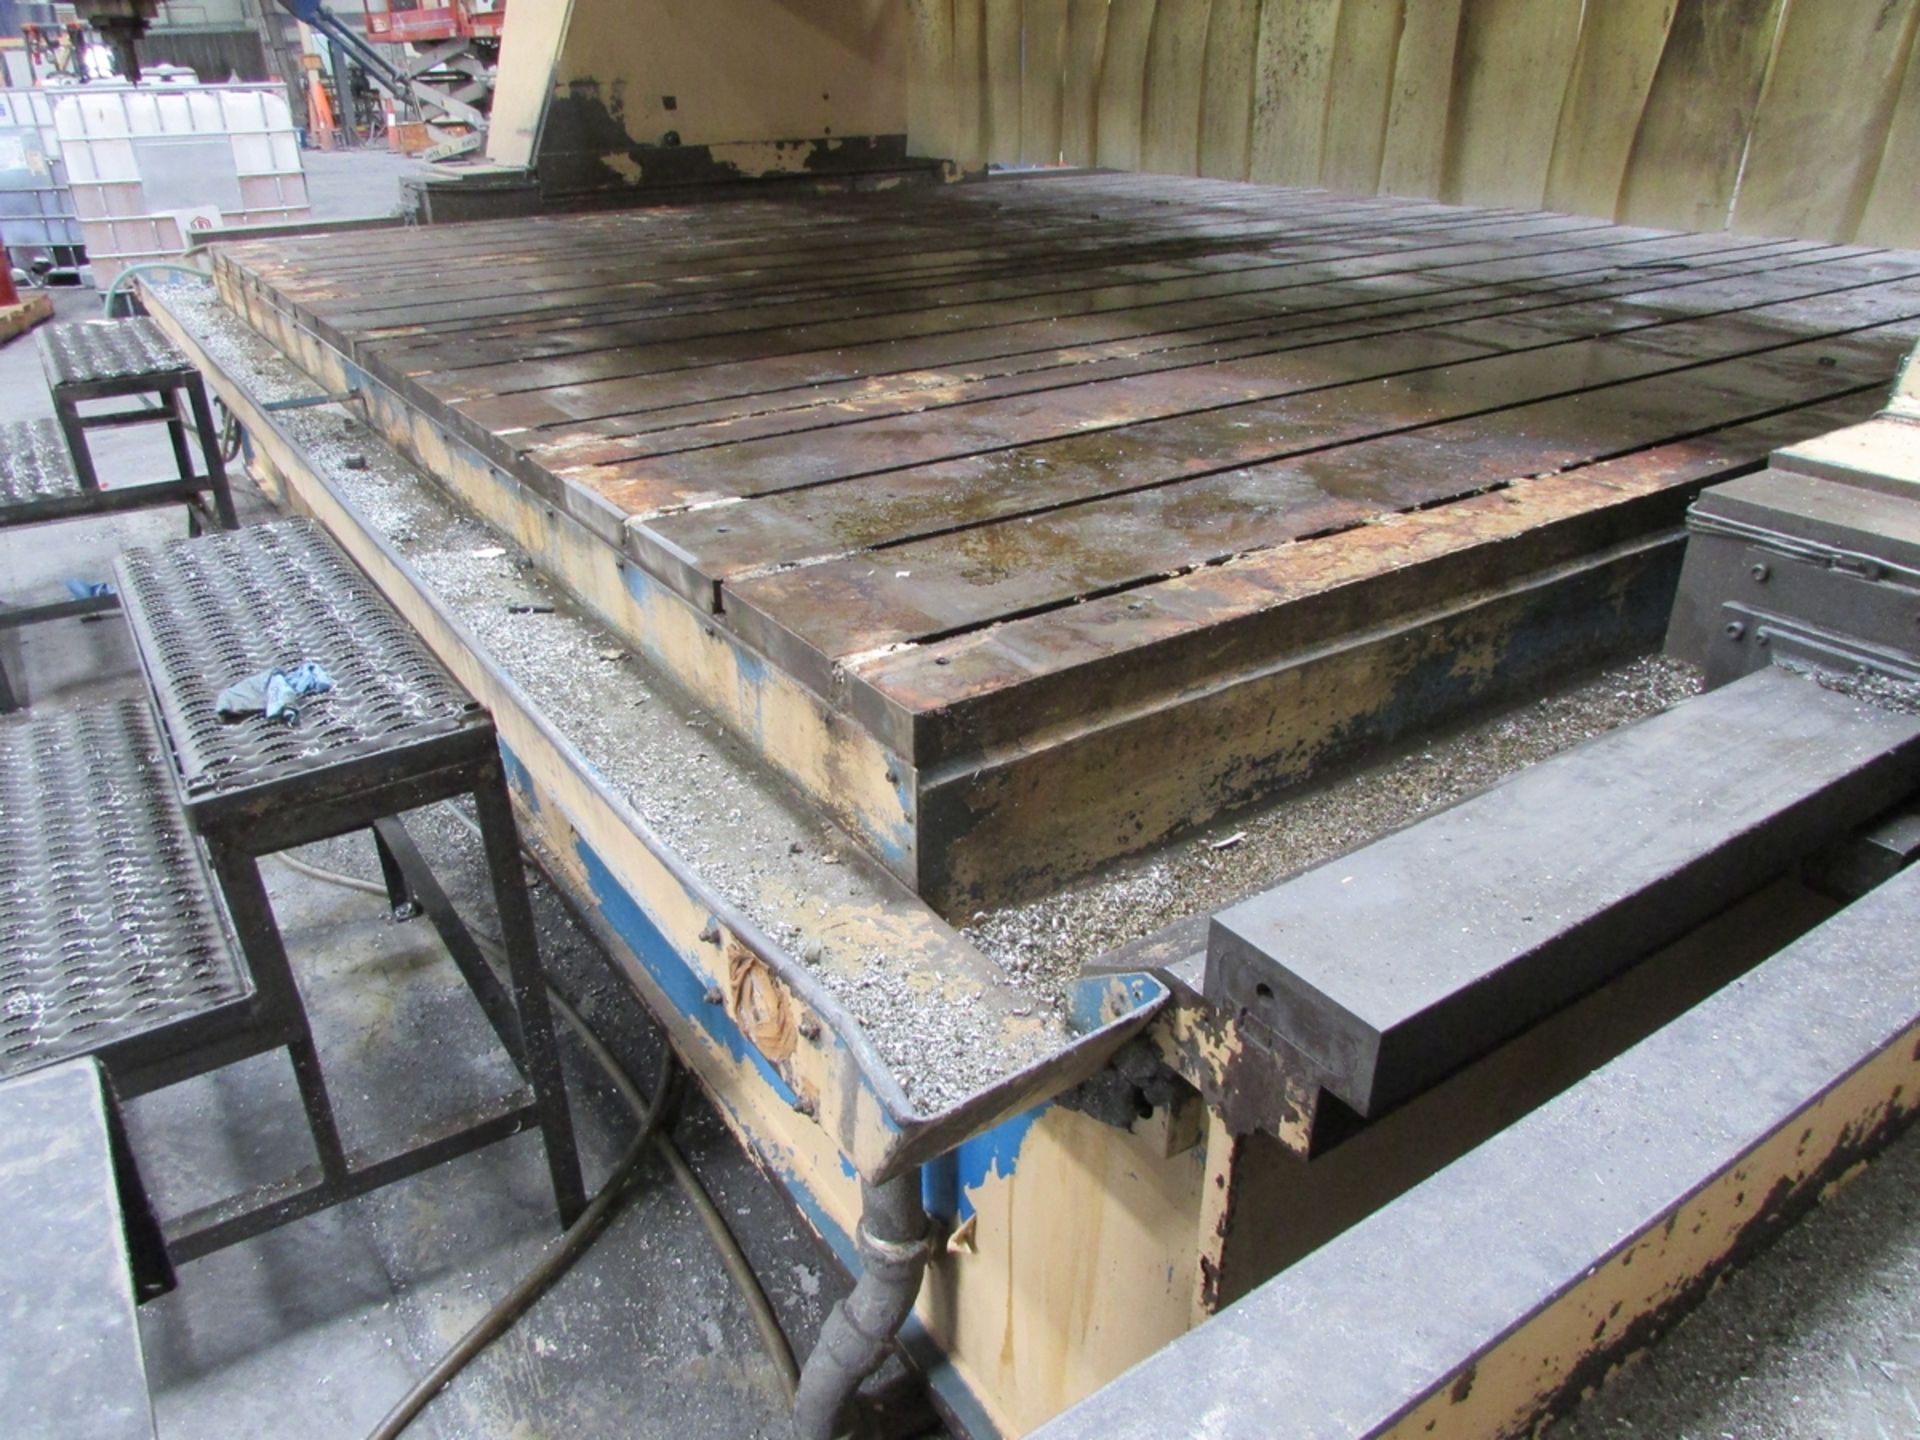 T-SLOTTED GANTRY MILL TABLE, 120' X 160", 125' BEDWAY LENGTH - Image 15 of 18